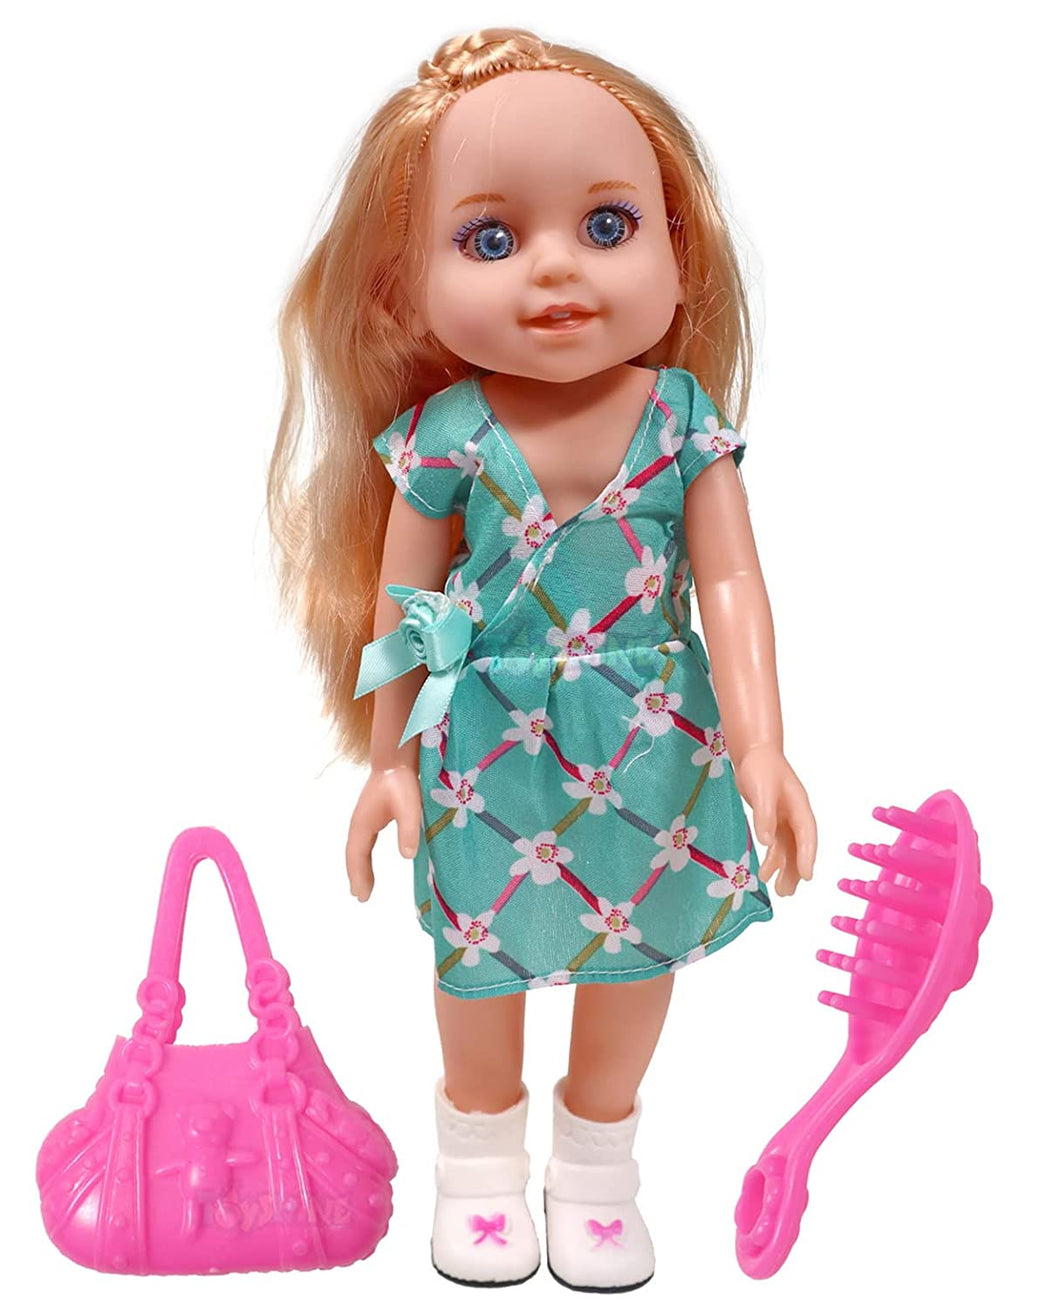 Toyshine 12 Inches Fashion Beauty Doll with Toy Make Up Accessory - Green Dress